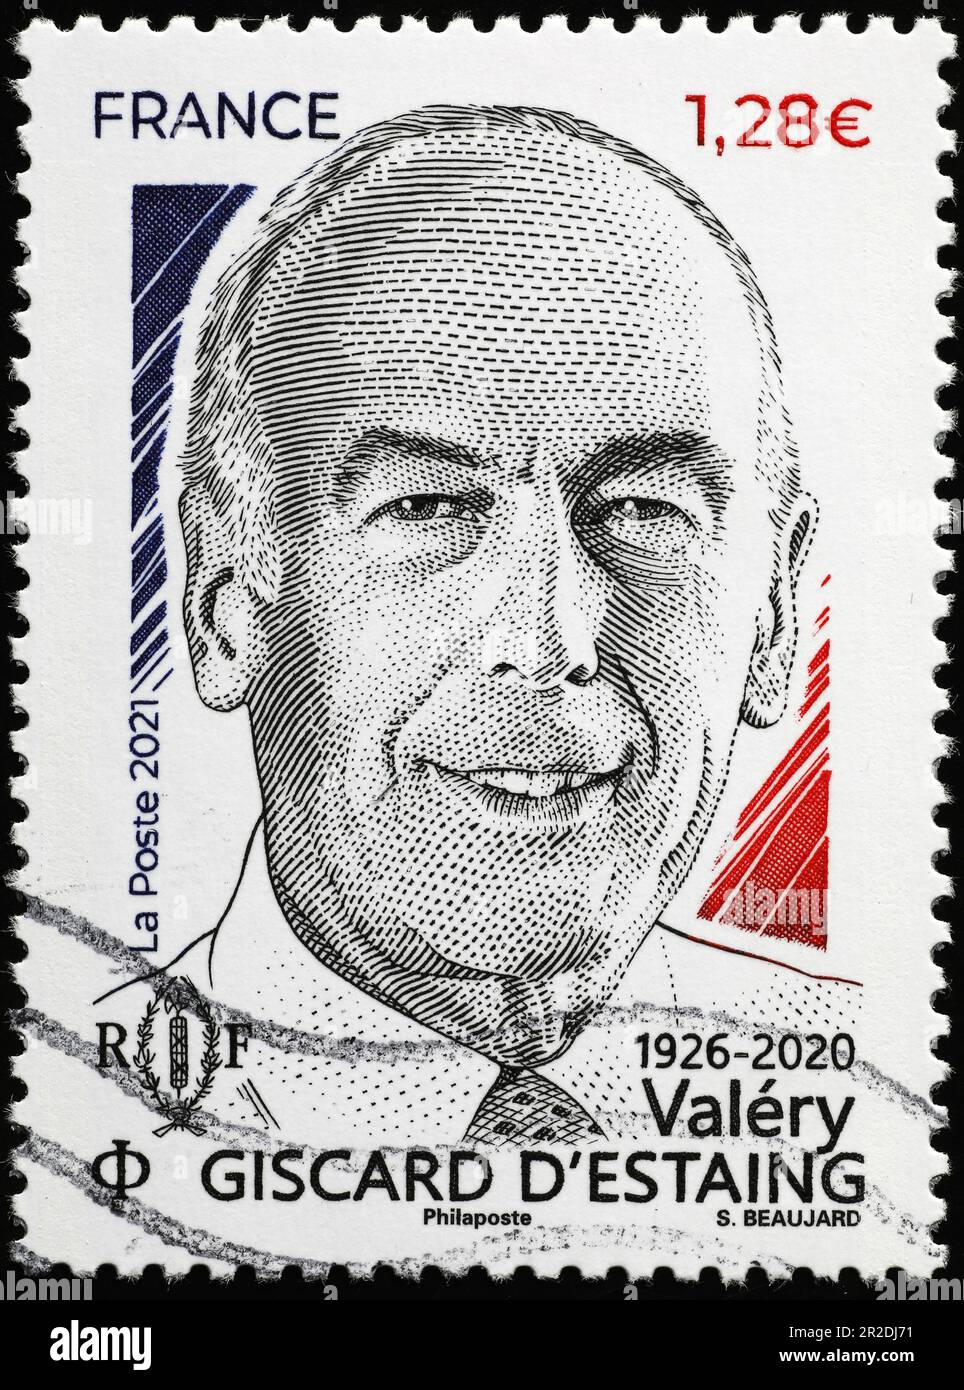 President Valery Giscard d'Estaing on french postage stamp Stock Photo